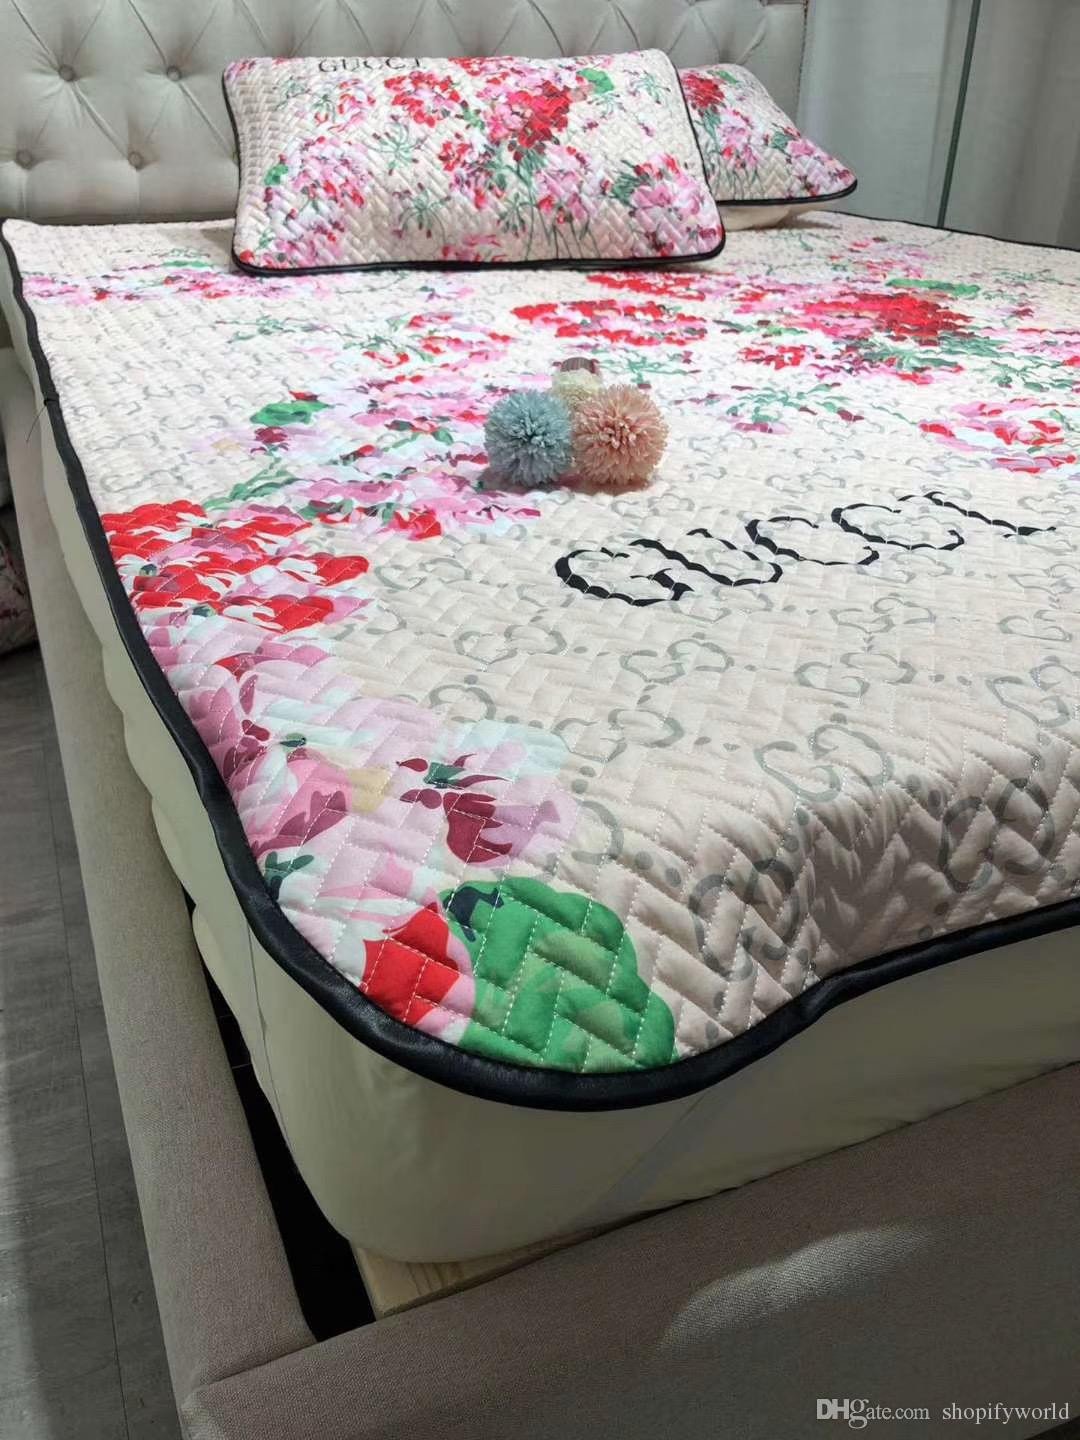 Pink and Gray Bedroom Inspirational 2019 Full Flower Design Upholstered Seat Suits Hot Brand New Full Queen Size soft Mattress Set Mattress Pad From Shopifyworld $138 88